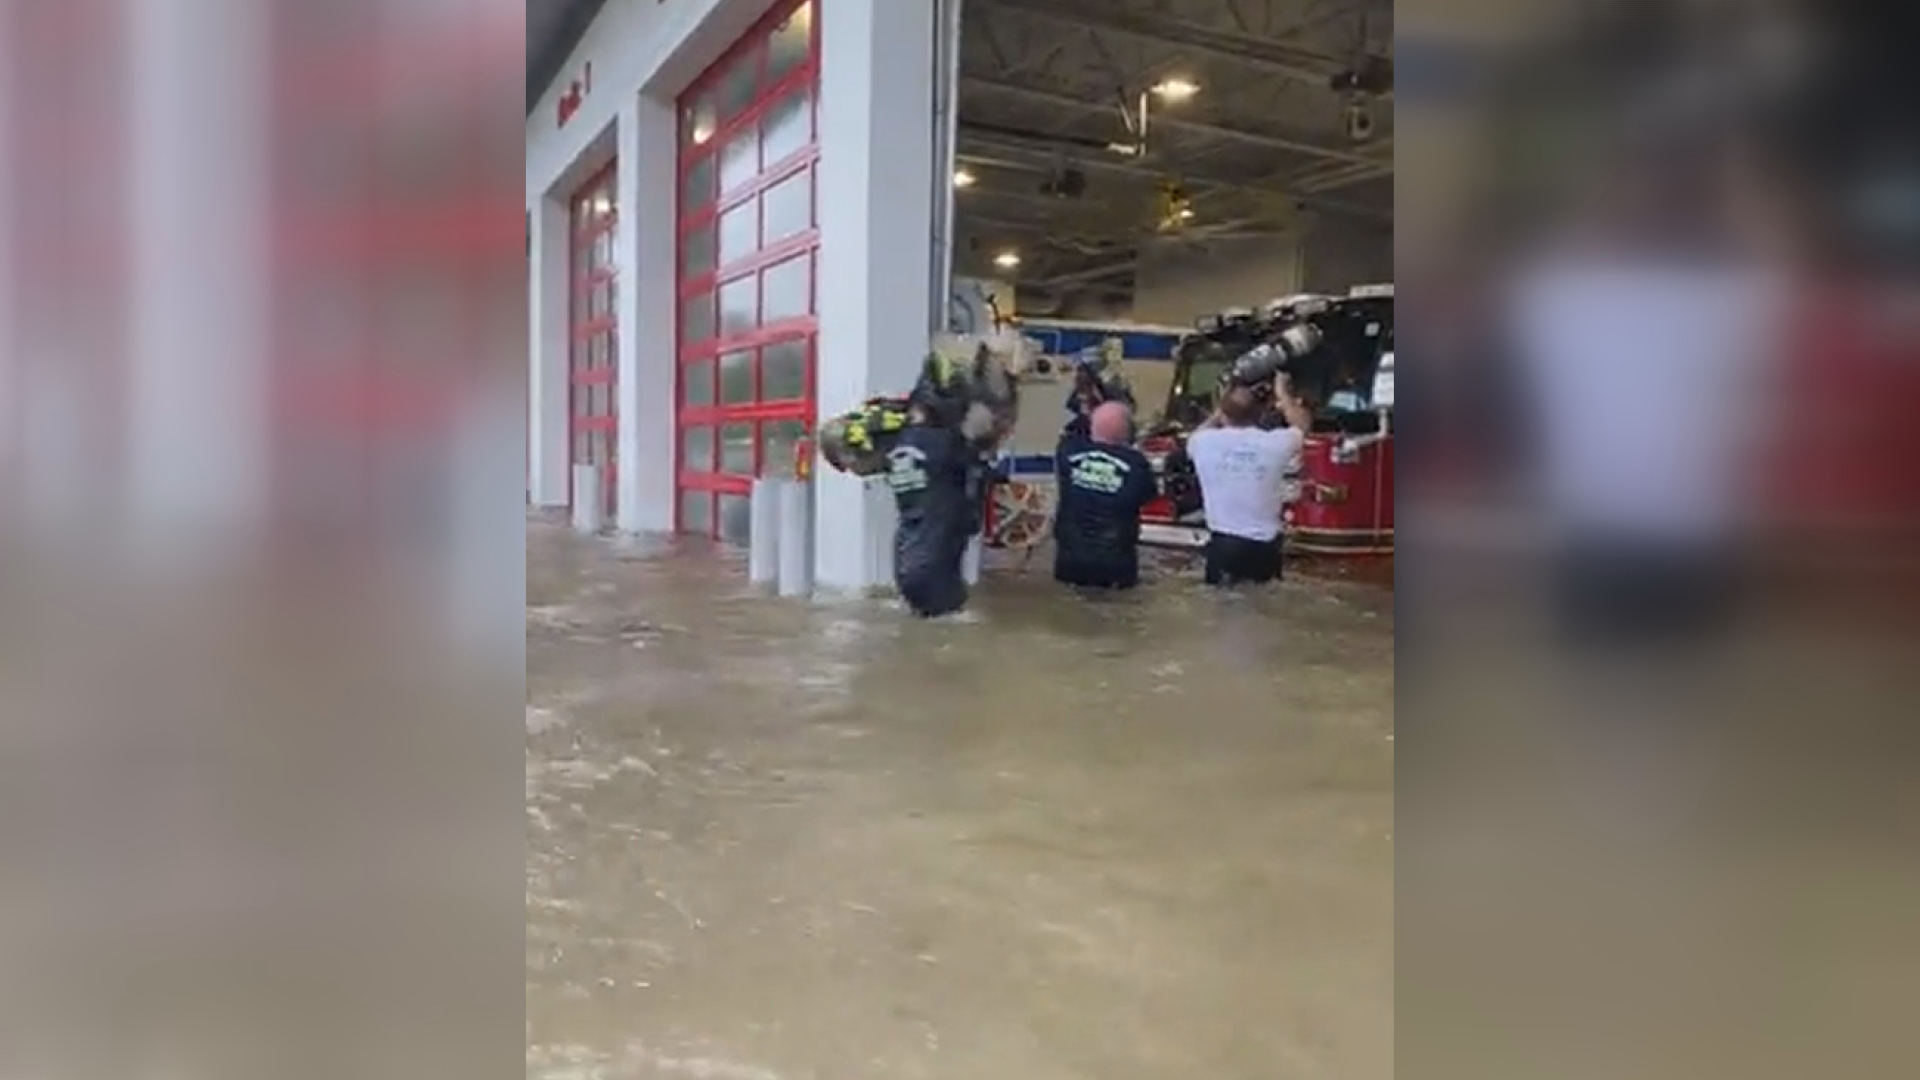 The Naples Fire-Rescue Department posted this video of firefighters unloading a truck while surrounded in water from the storm surge.